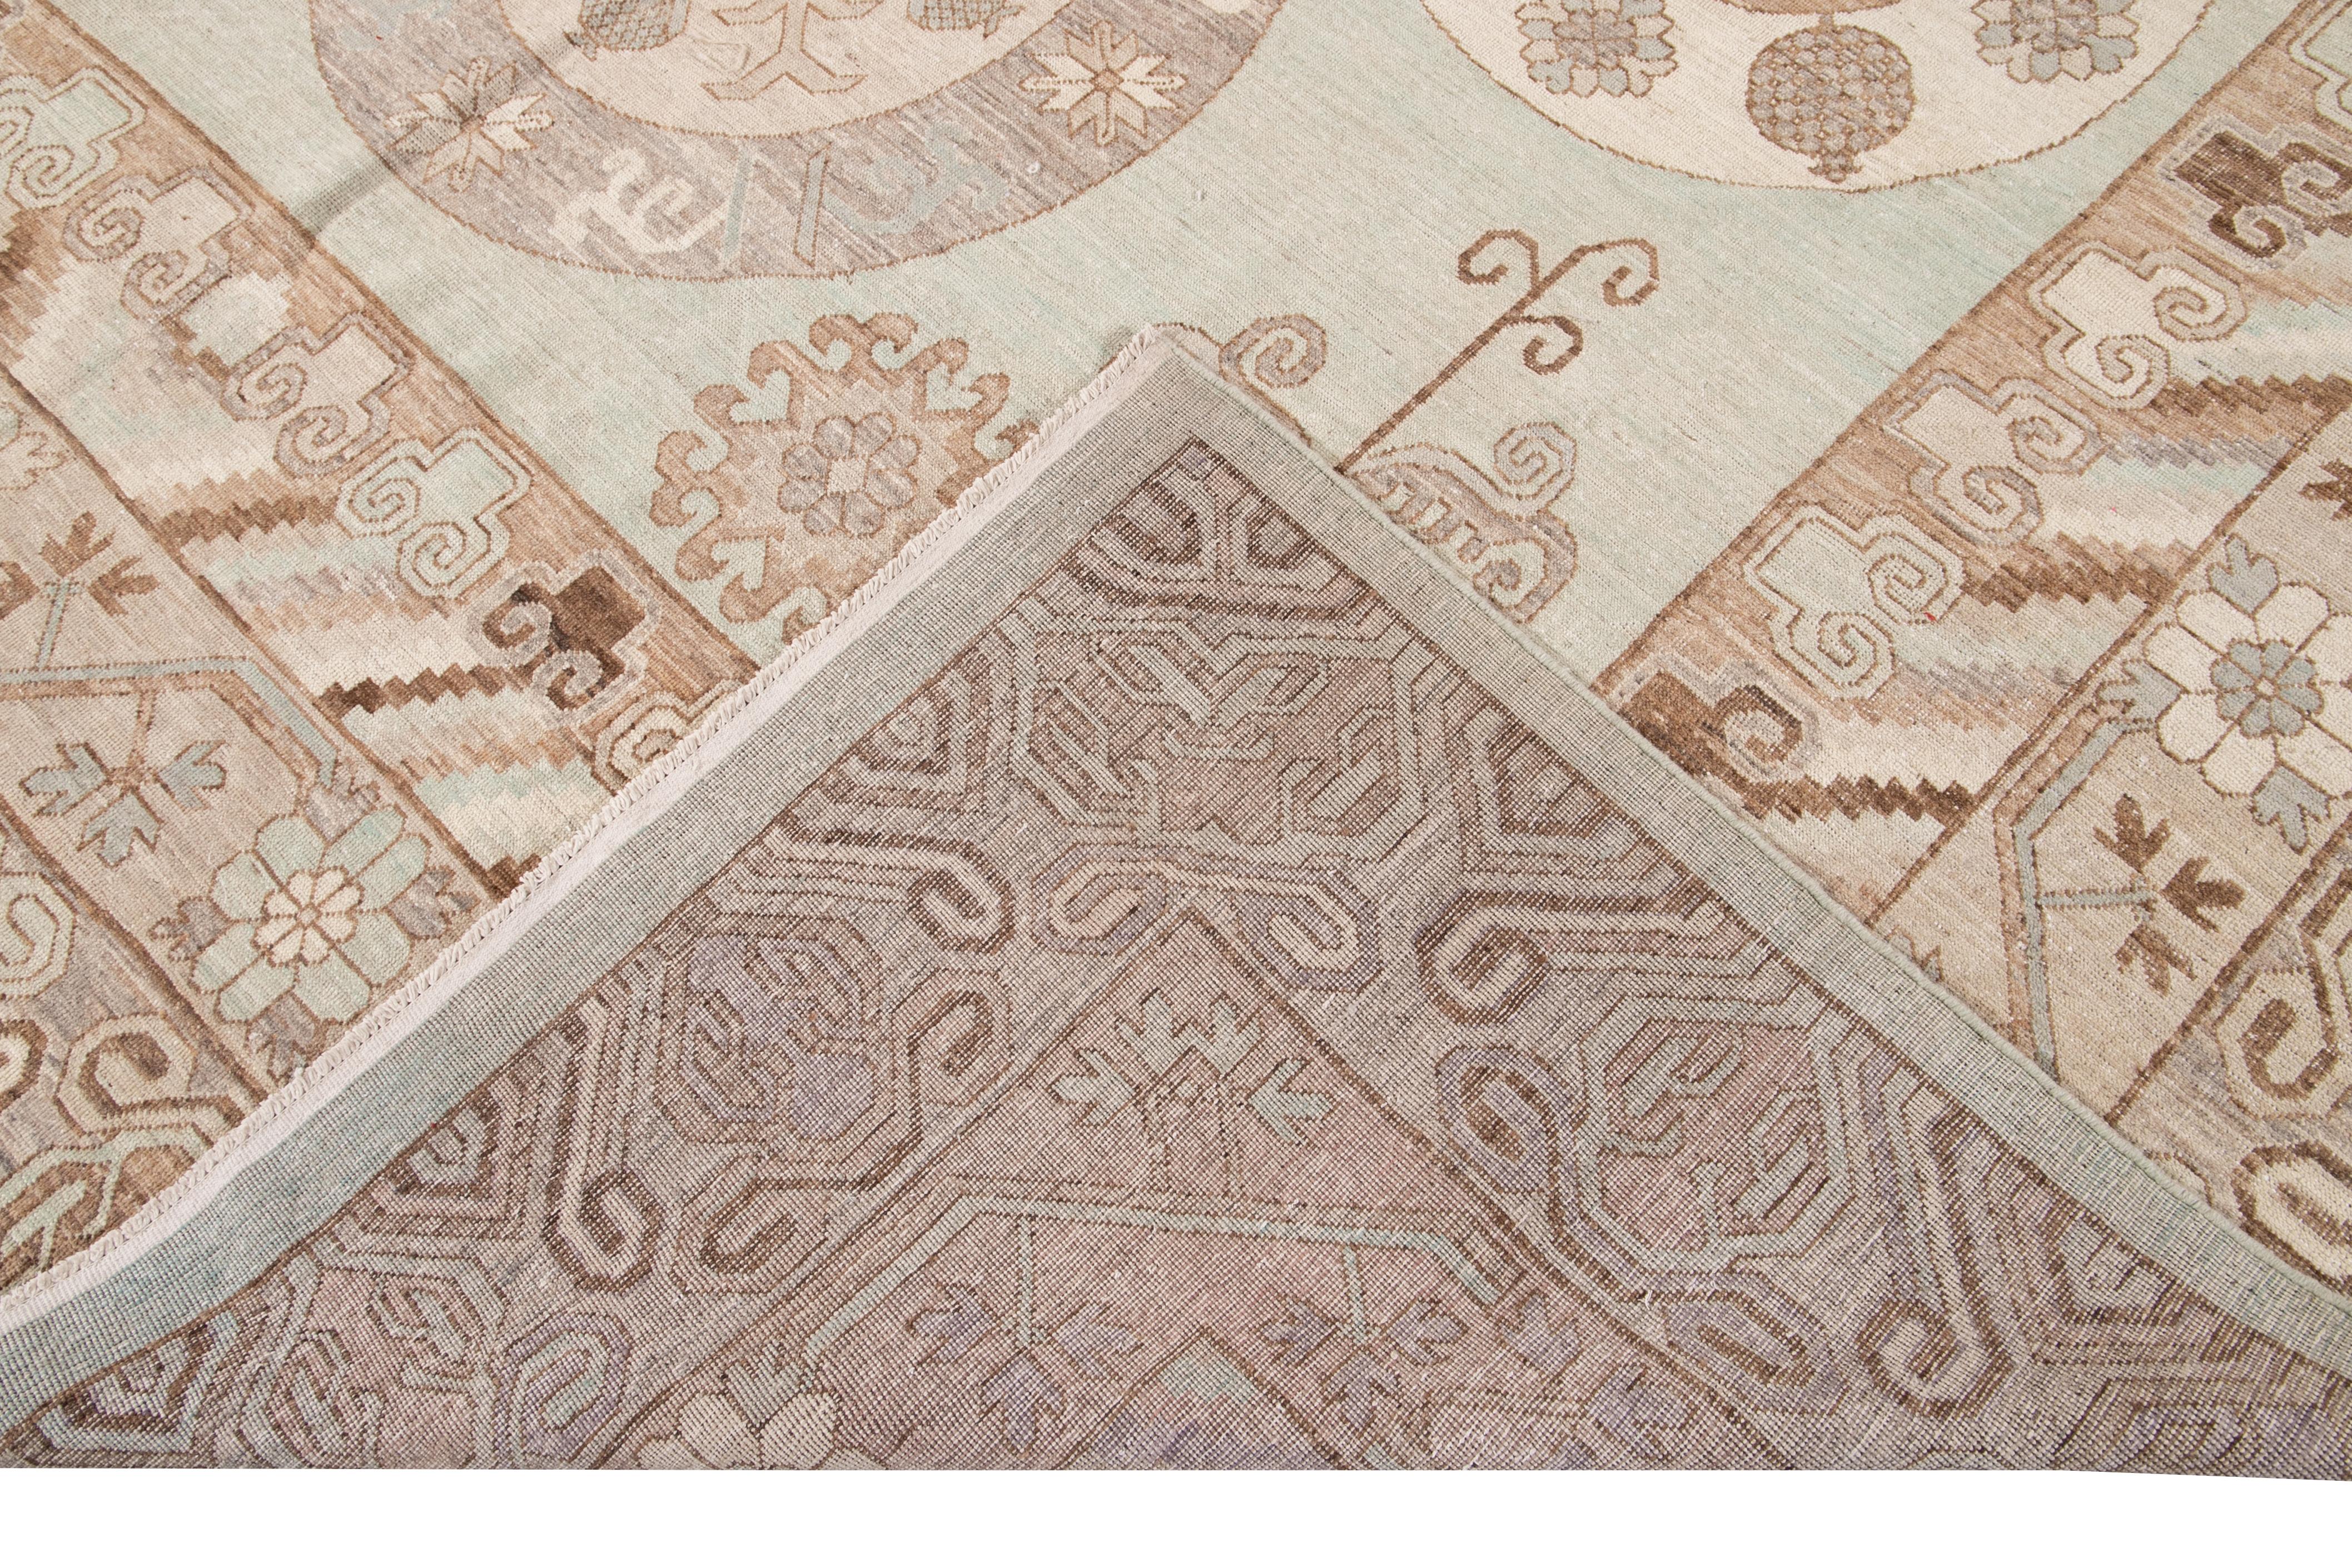 Beautiful modern oversize Khotan style hand knotted wool rug green field. This Khotan-style rug has a beautifully designed frame and accent of blue, beige, and brown in a gorgeous all-over geometric medallion floral design.

This rug measures